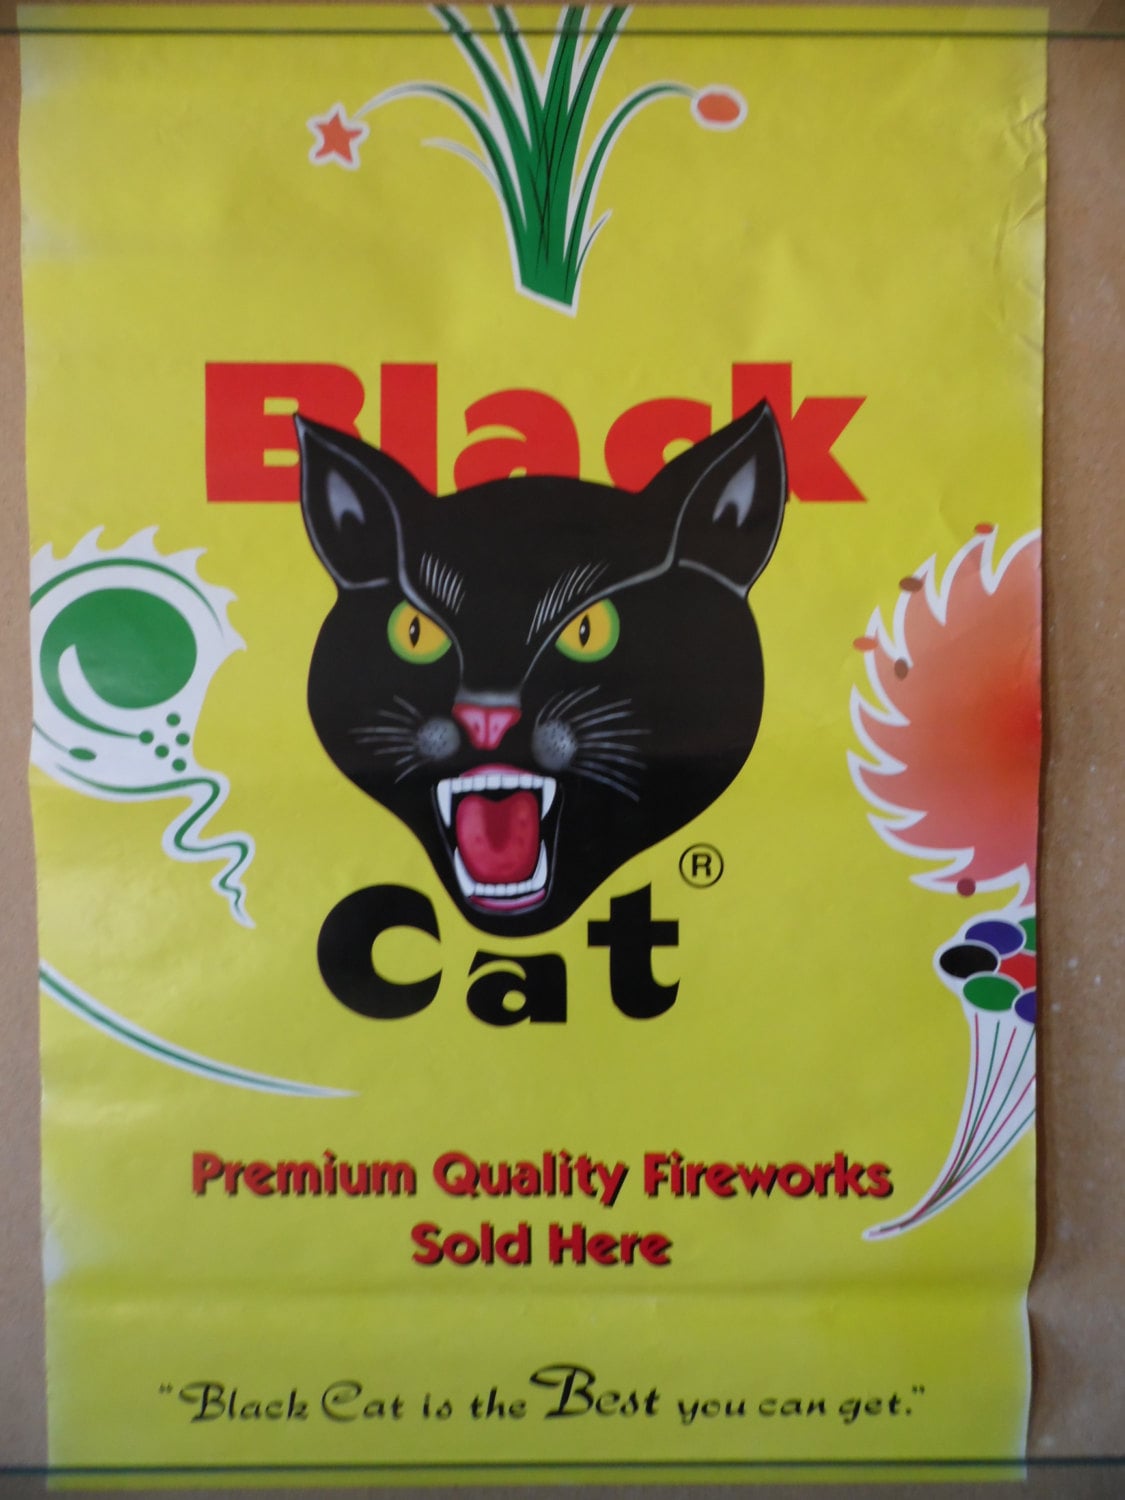 Black Cat Fireworks ad poster by theposterposter on Etsy